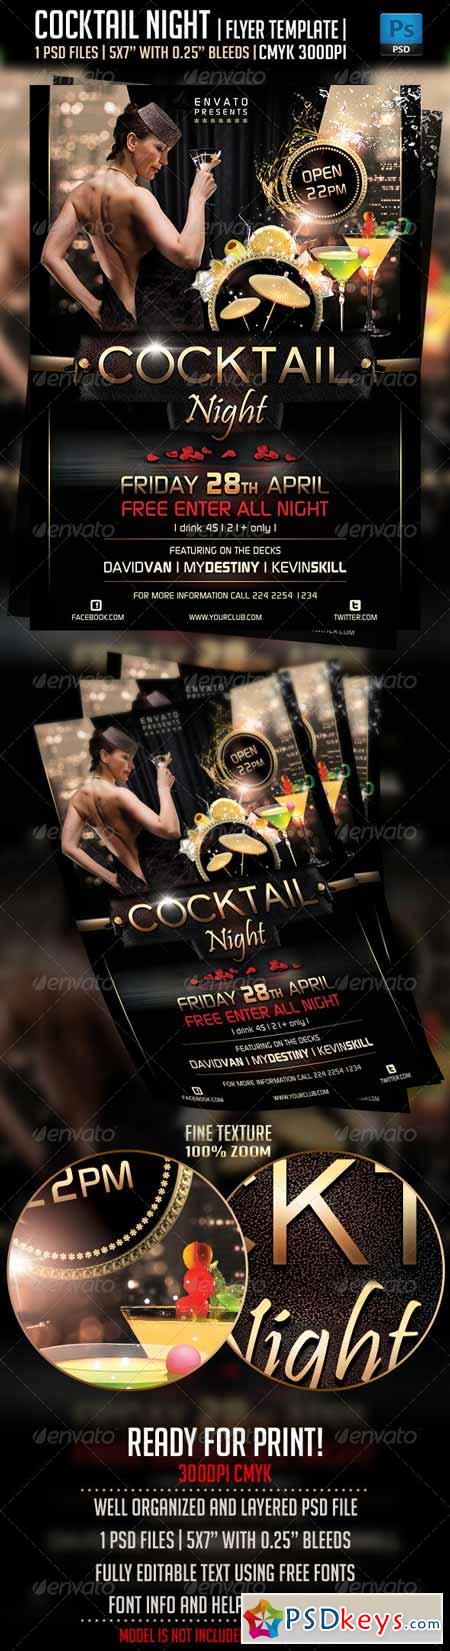 Cocktail Night Flyer Template 4338252